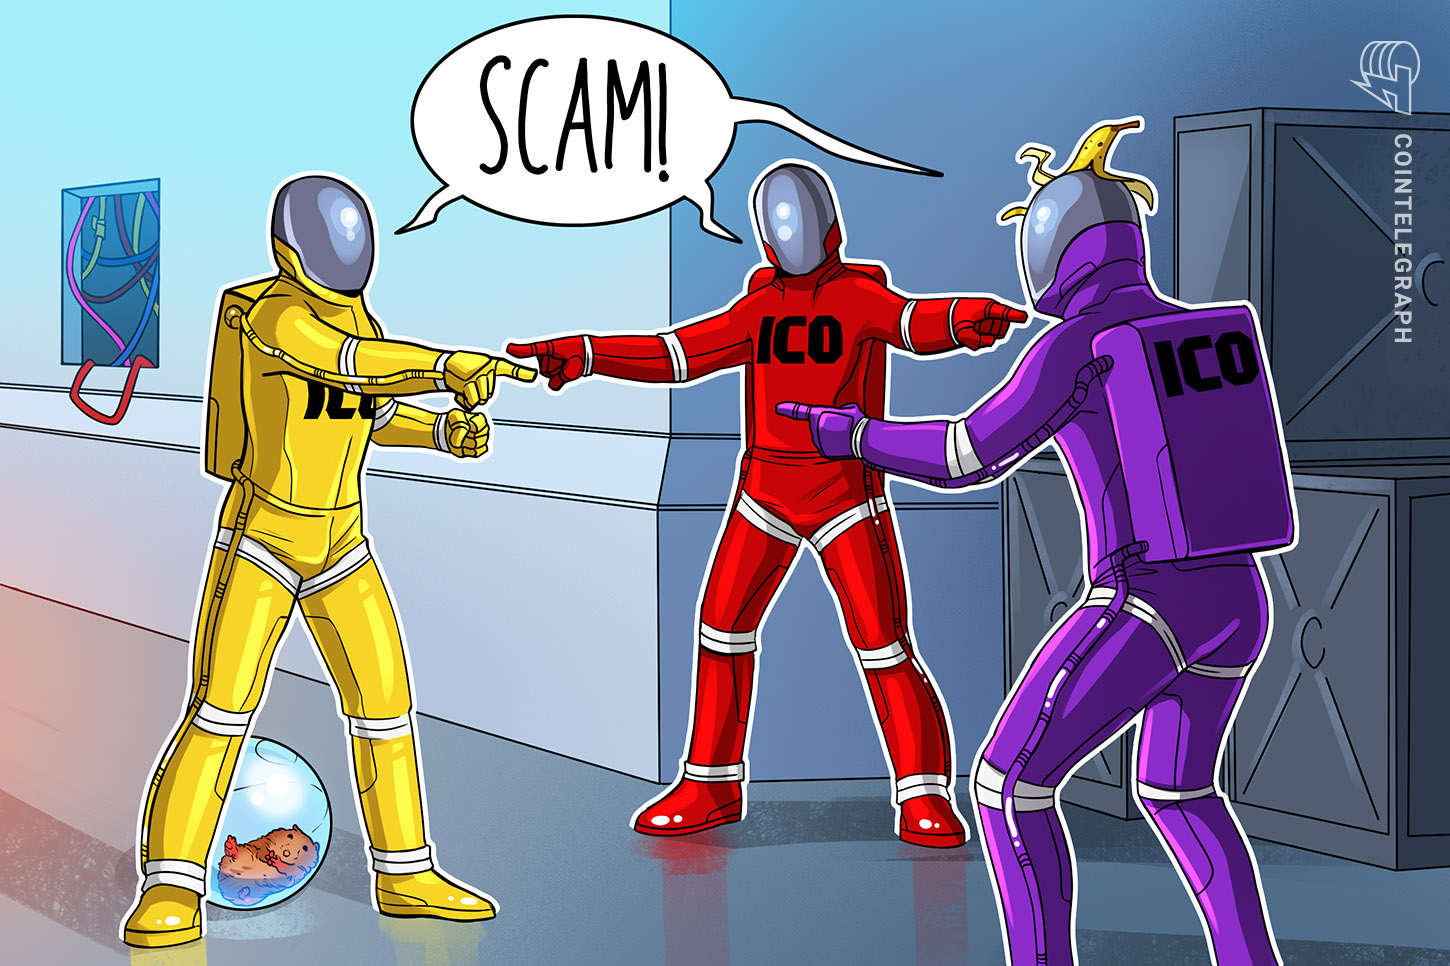 Did you fall for it? 13 ICO scams that fooled thousands